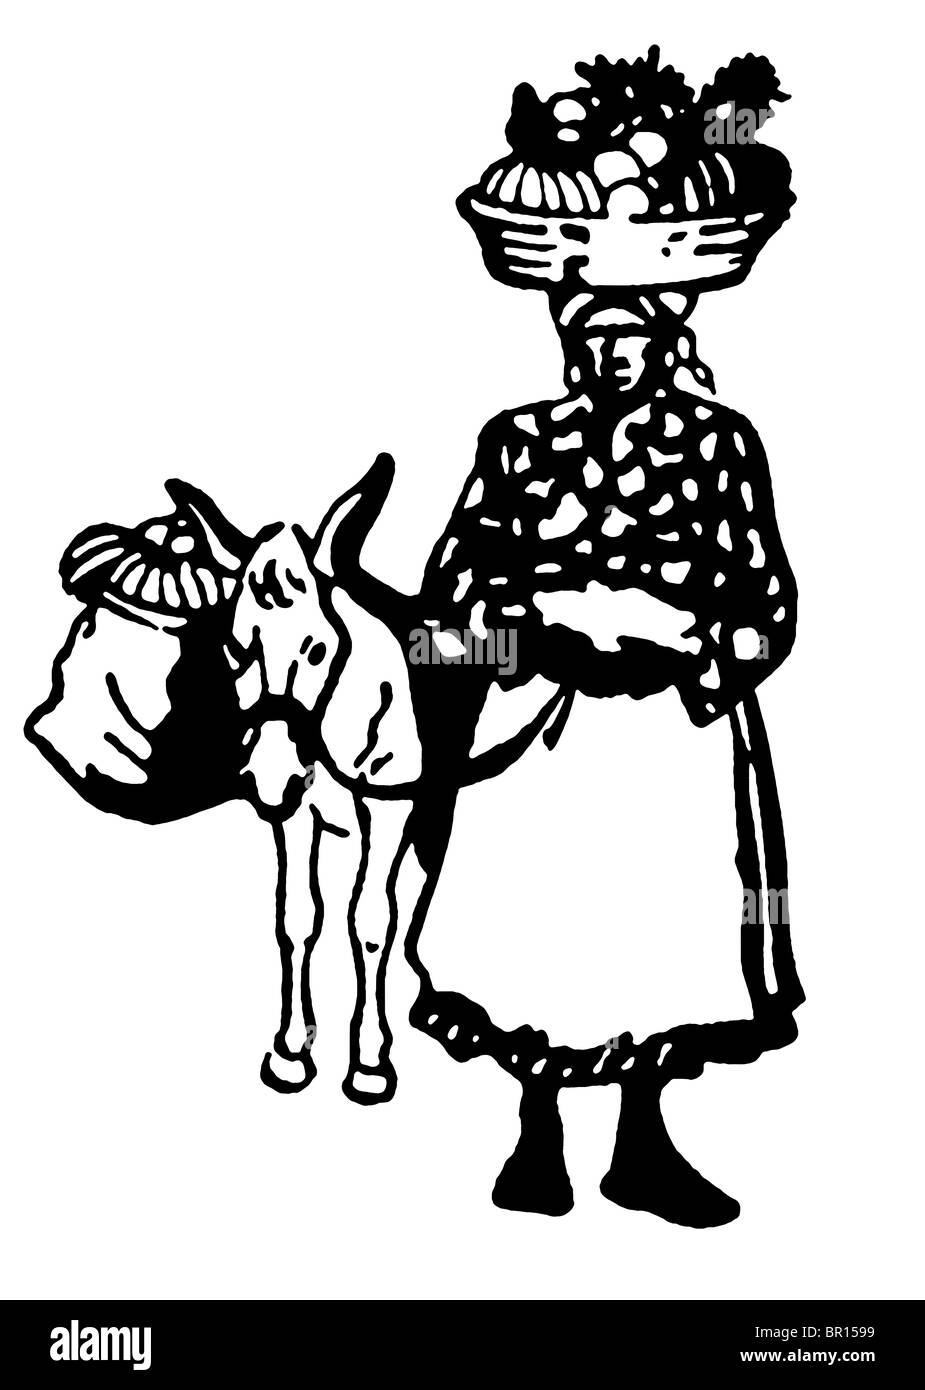 A black and white version of a vintage illustration of a woman carrying positions in a basket on her head Stock Photo